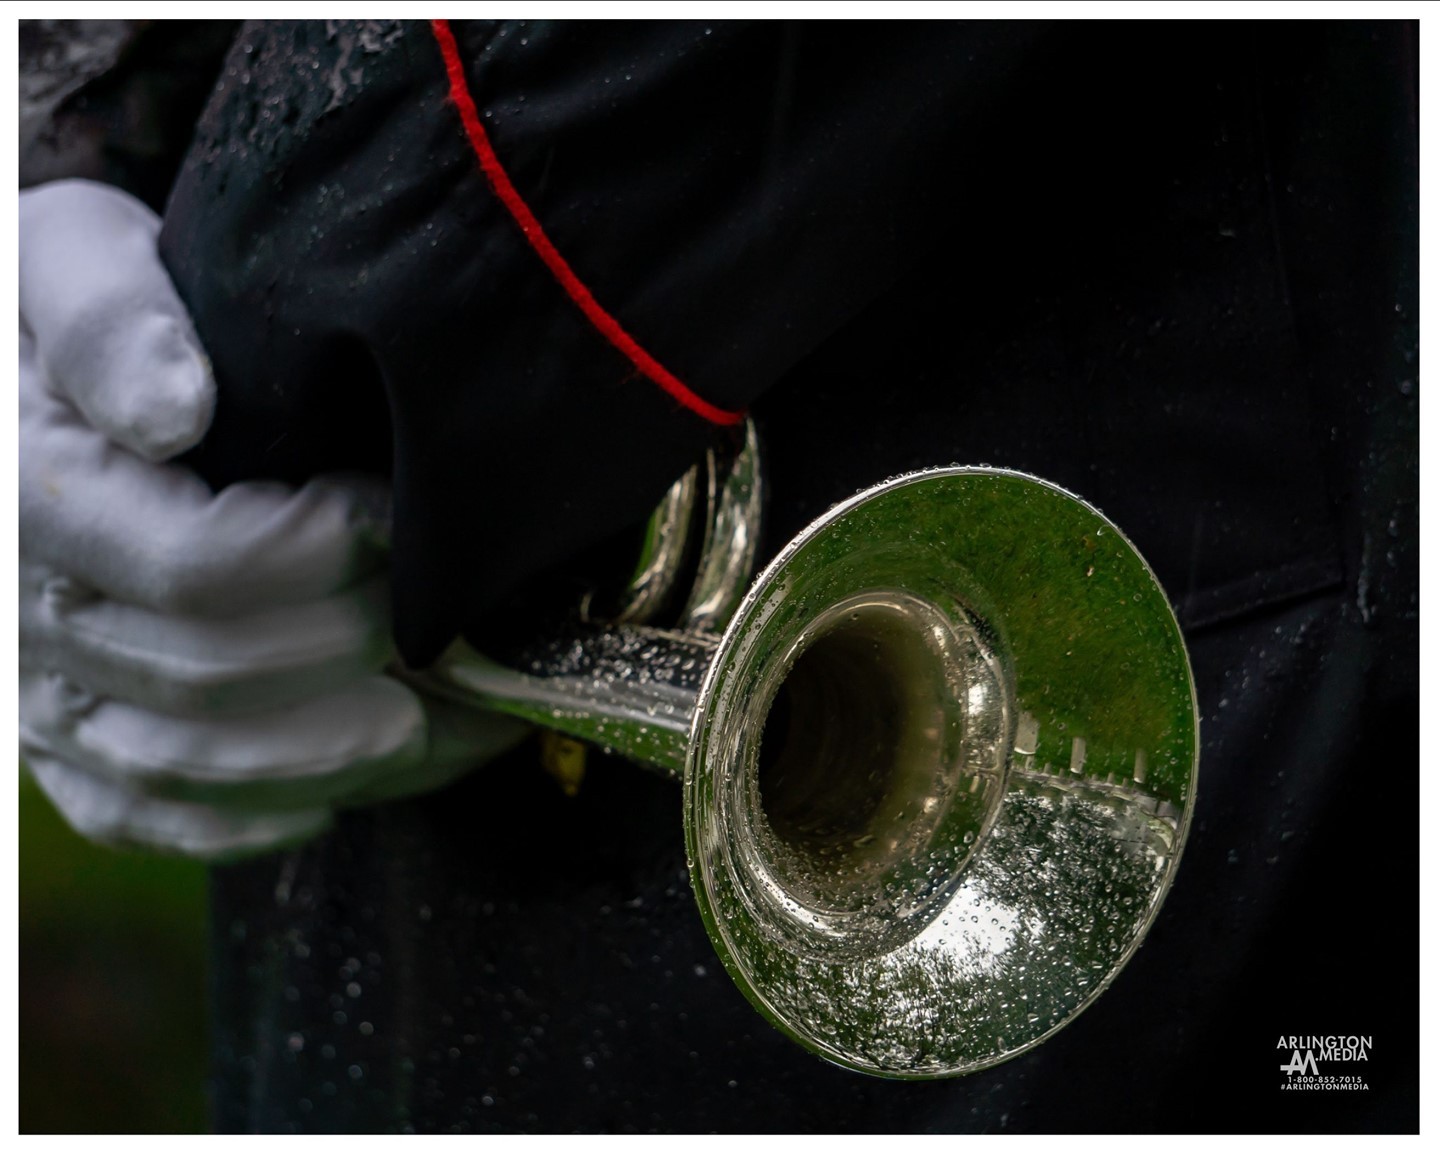 Raindrops on a bugle in Arlington National Cemetery as captured during a rainstorm by our @arlingtonmedia team.

The bugle is one of the simplest brass instruments, having no valves or other pitch-altering devices. All pitch control is done by varying the player's embouchure. Consequently, the bugle is limited to notes within the harmonic series. The bugle is used mainly in the military and Boy Scouts, where the bugle call is used to indicate the daily routines of camp.

Historically the bugle was used in the cavalry to relay instructions from officers to soldiers during battle. They were used to assemble the leaders and to give marching orders to the camps.  The Rifles, an infantry regiment in the British Army, has retained the bugle for ceremonial and symbolic purposes. The bugle has also been used as a sign of peace in the case of a surrender.